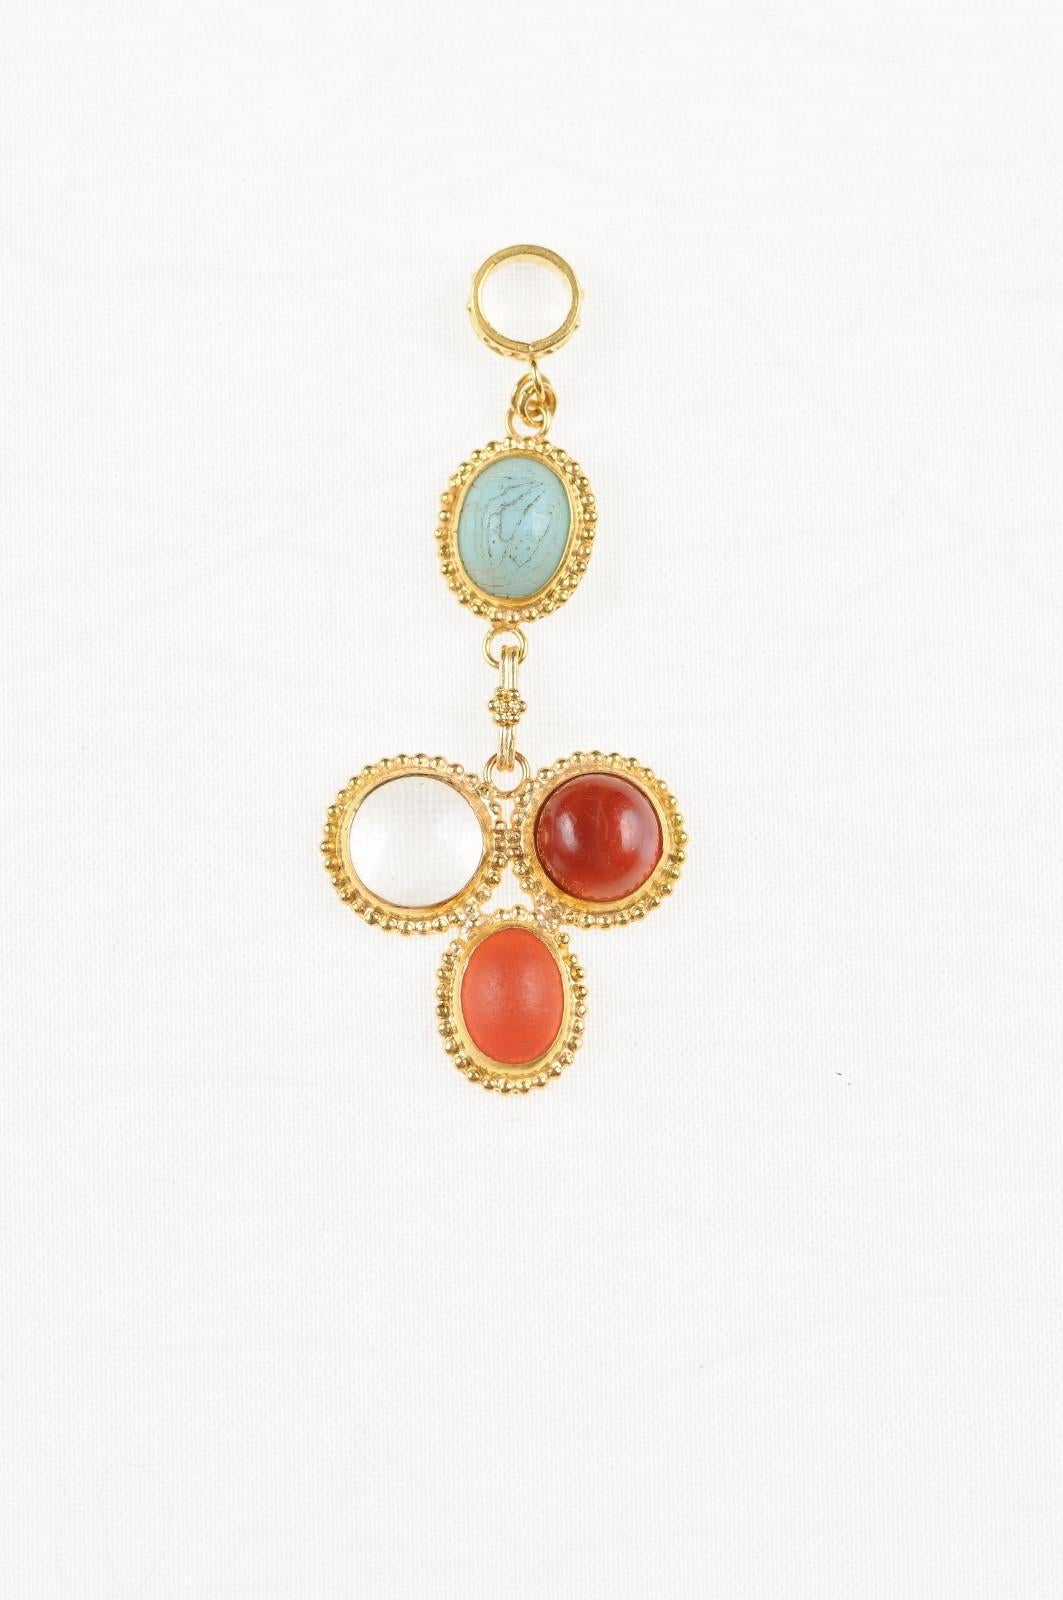 A lovely multi-colored drop pendant for necklace made from Roman glass (400 to 500 AD) set within a custom 21 k gold pendant with gold bead accents and 21 k gold bail. Pendant measures 1 7/8